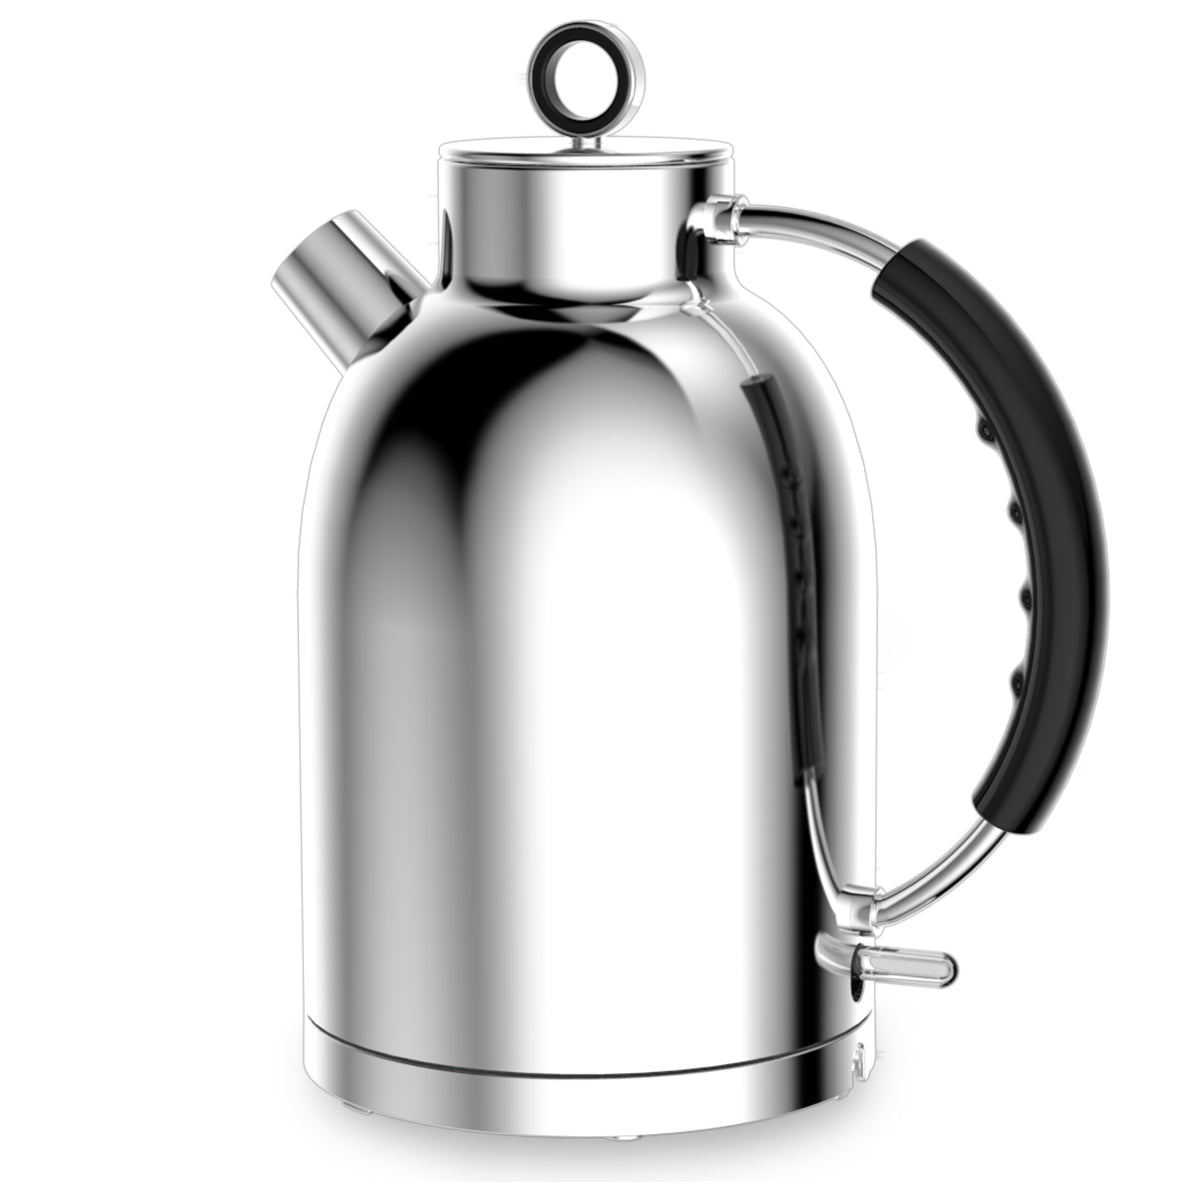 Electric Kettle, ASCOT Electric Tea Kettle, Stainless Steel Kettle Water  Boiler, Fast Boiling Kettle, 1.5L, 1500W, BPA-Free, Cordless, Automatic